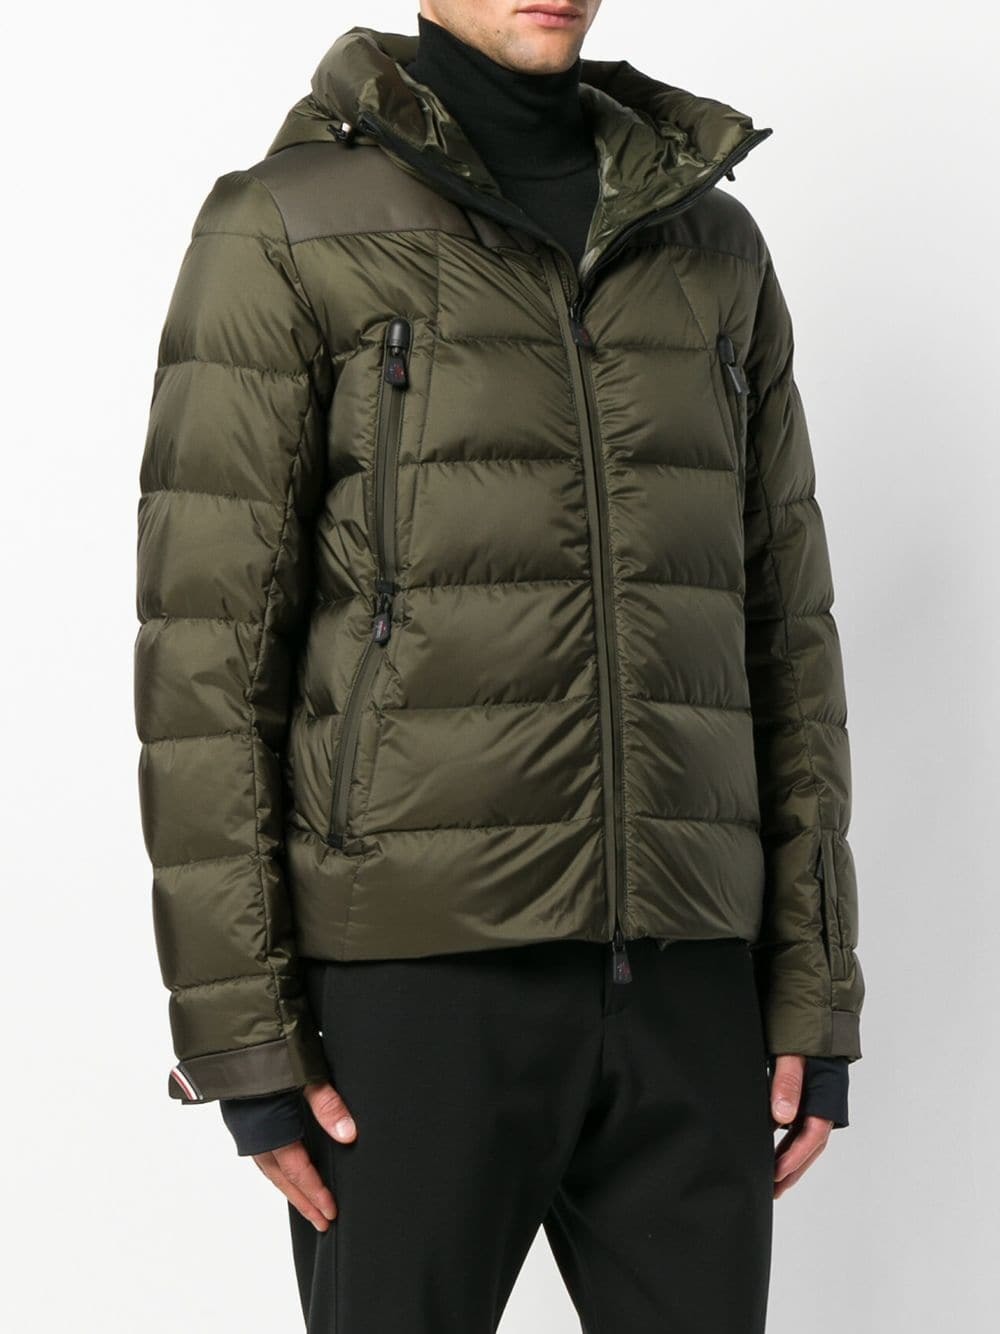 MONCLER GRENOBLE Padded Jacket, $1,076 | farfetch.com | Lookastic